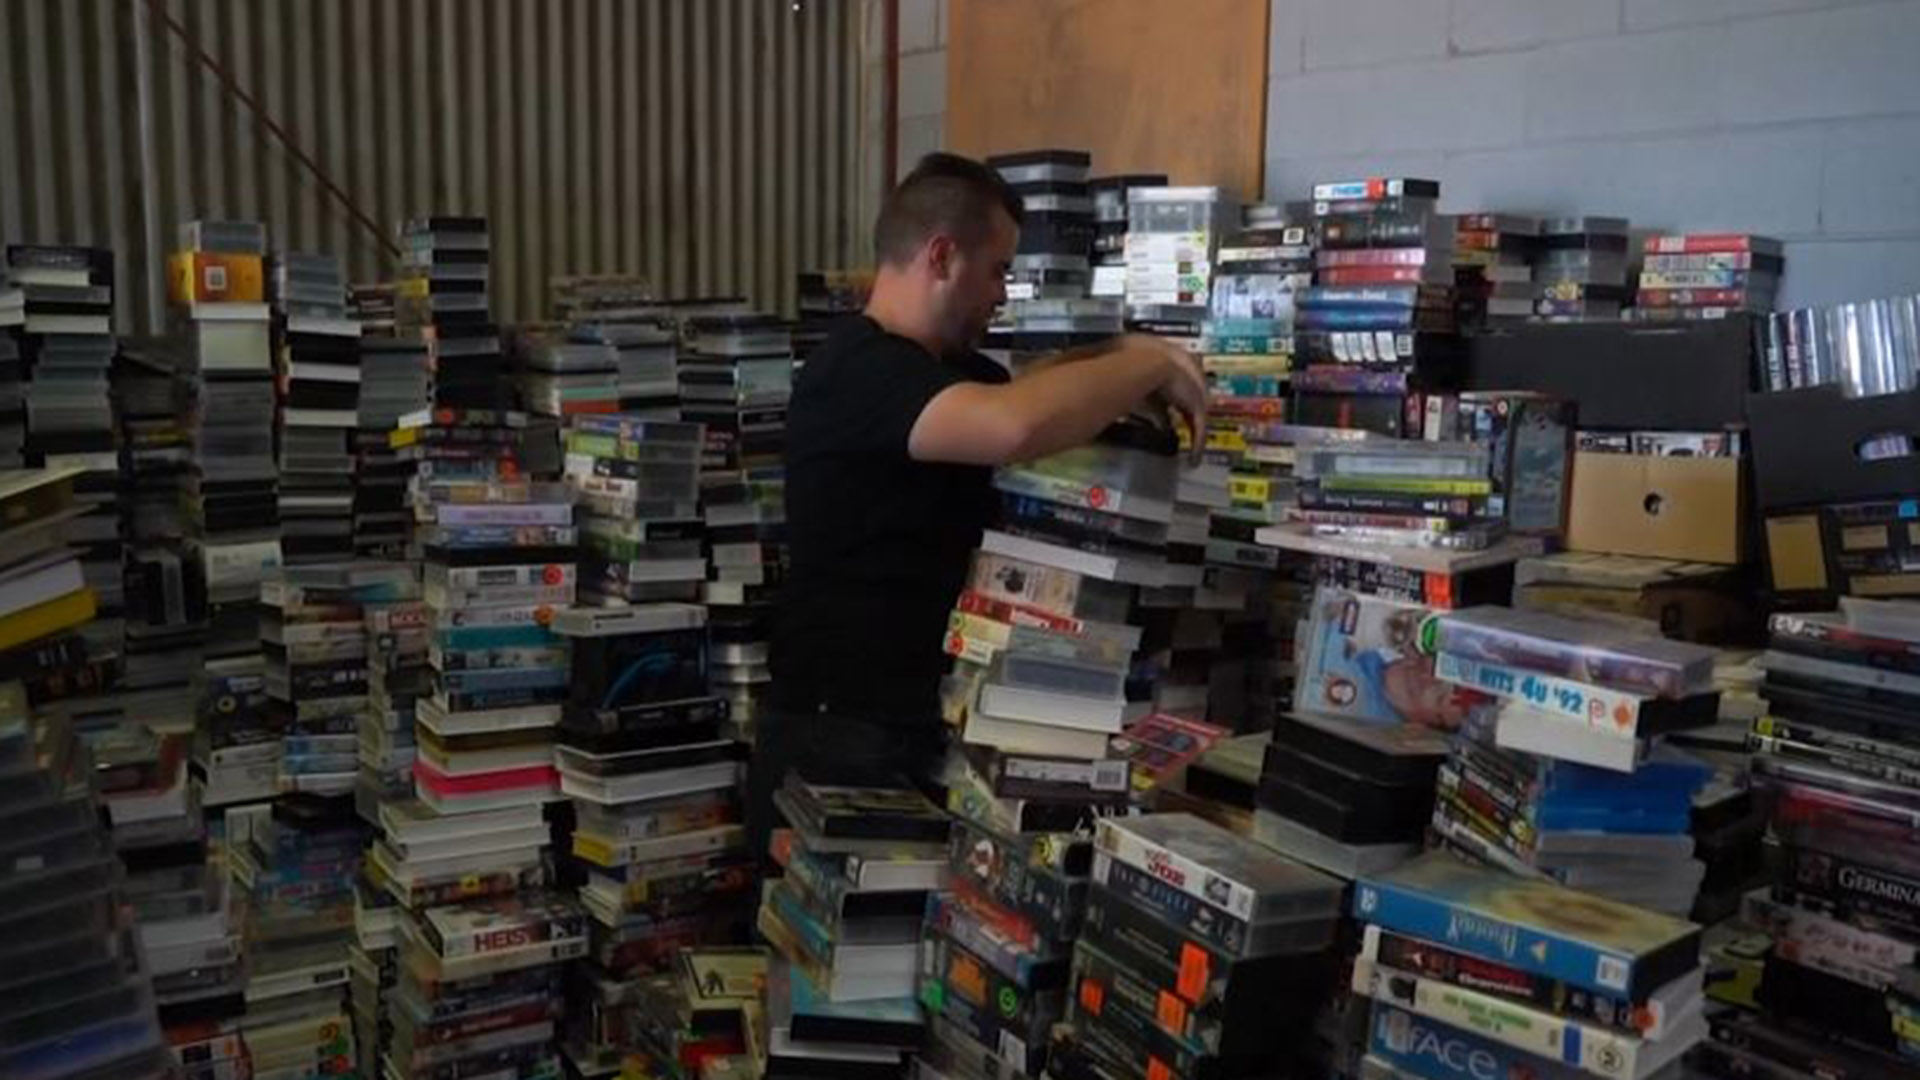 Two Australian collectors, with a passion for nostalgia, have found a lucrative market selling VHS video tapes.